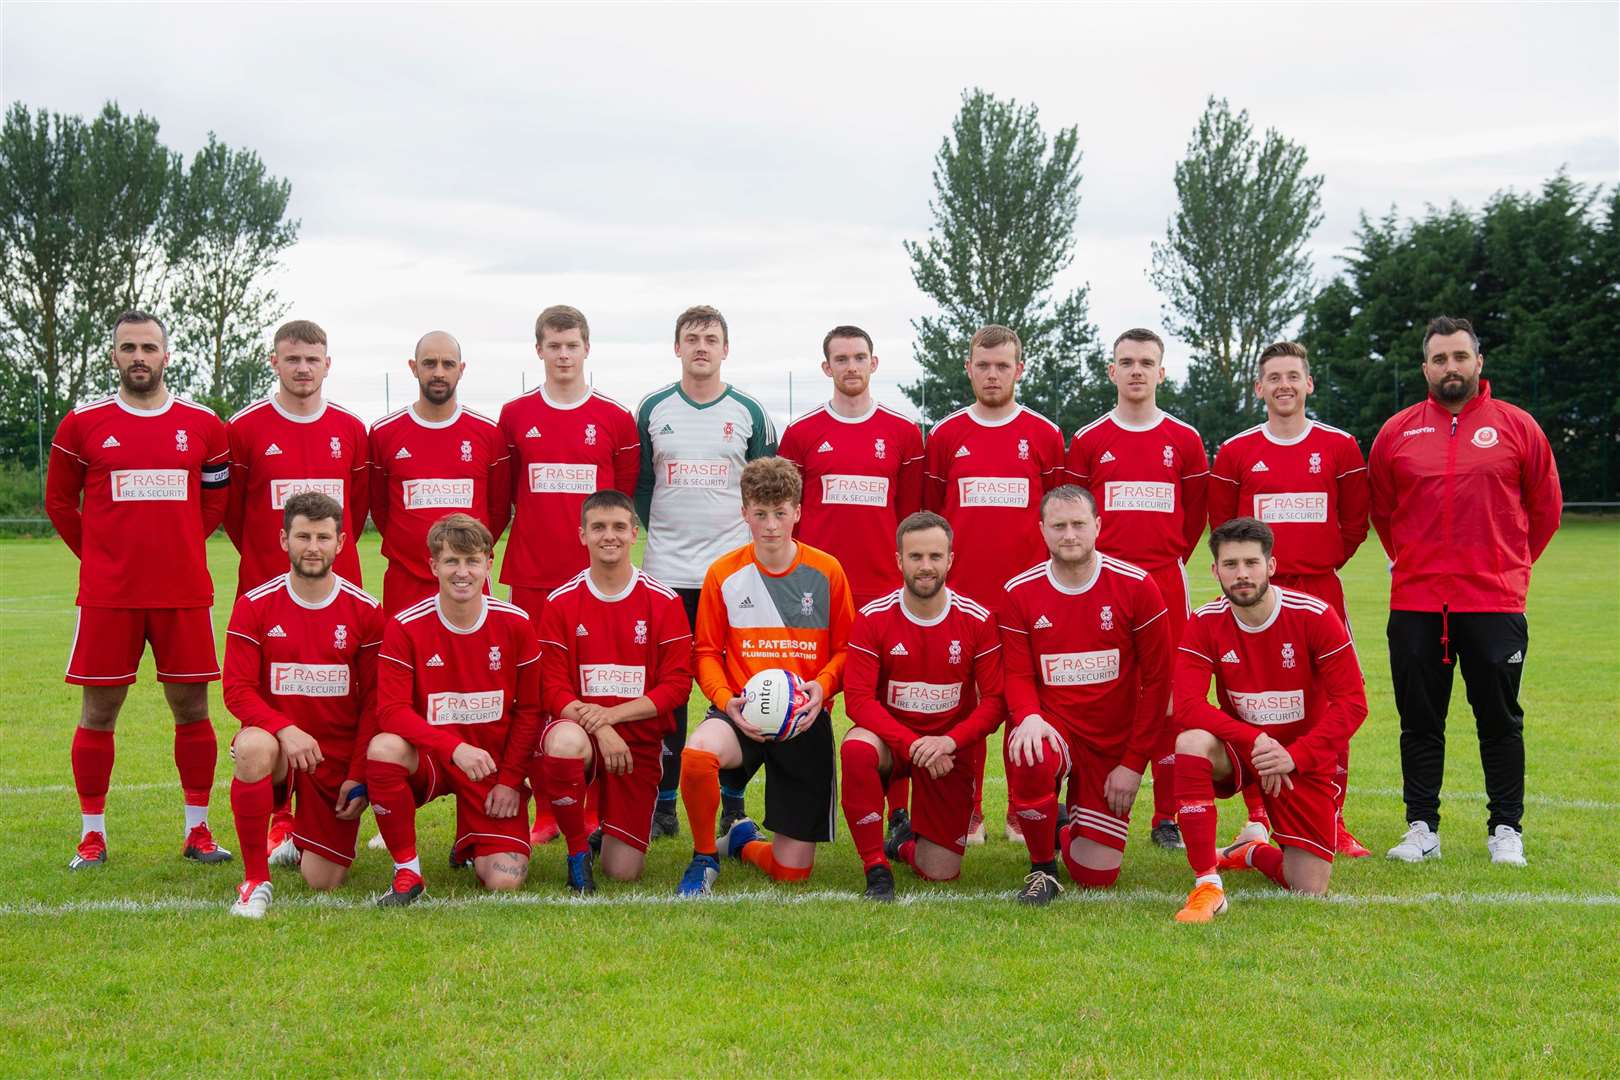 Forres Thistle team photo 2019-2020...Picture: Daniel Forsyth.